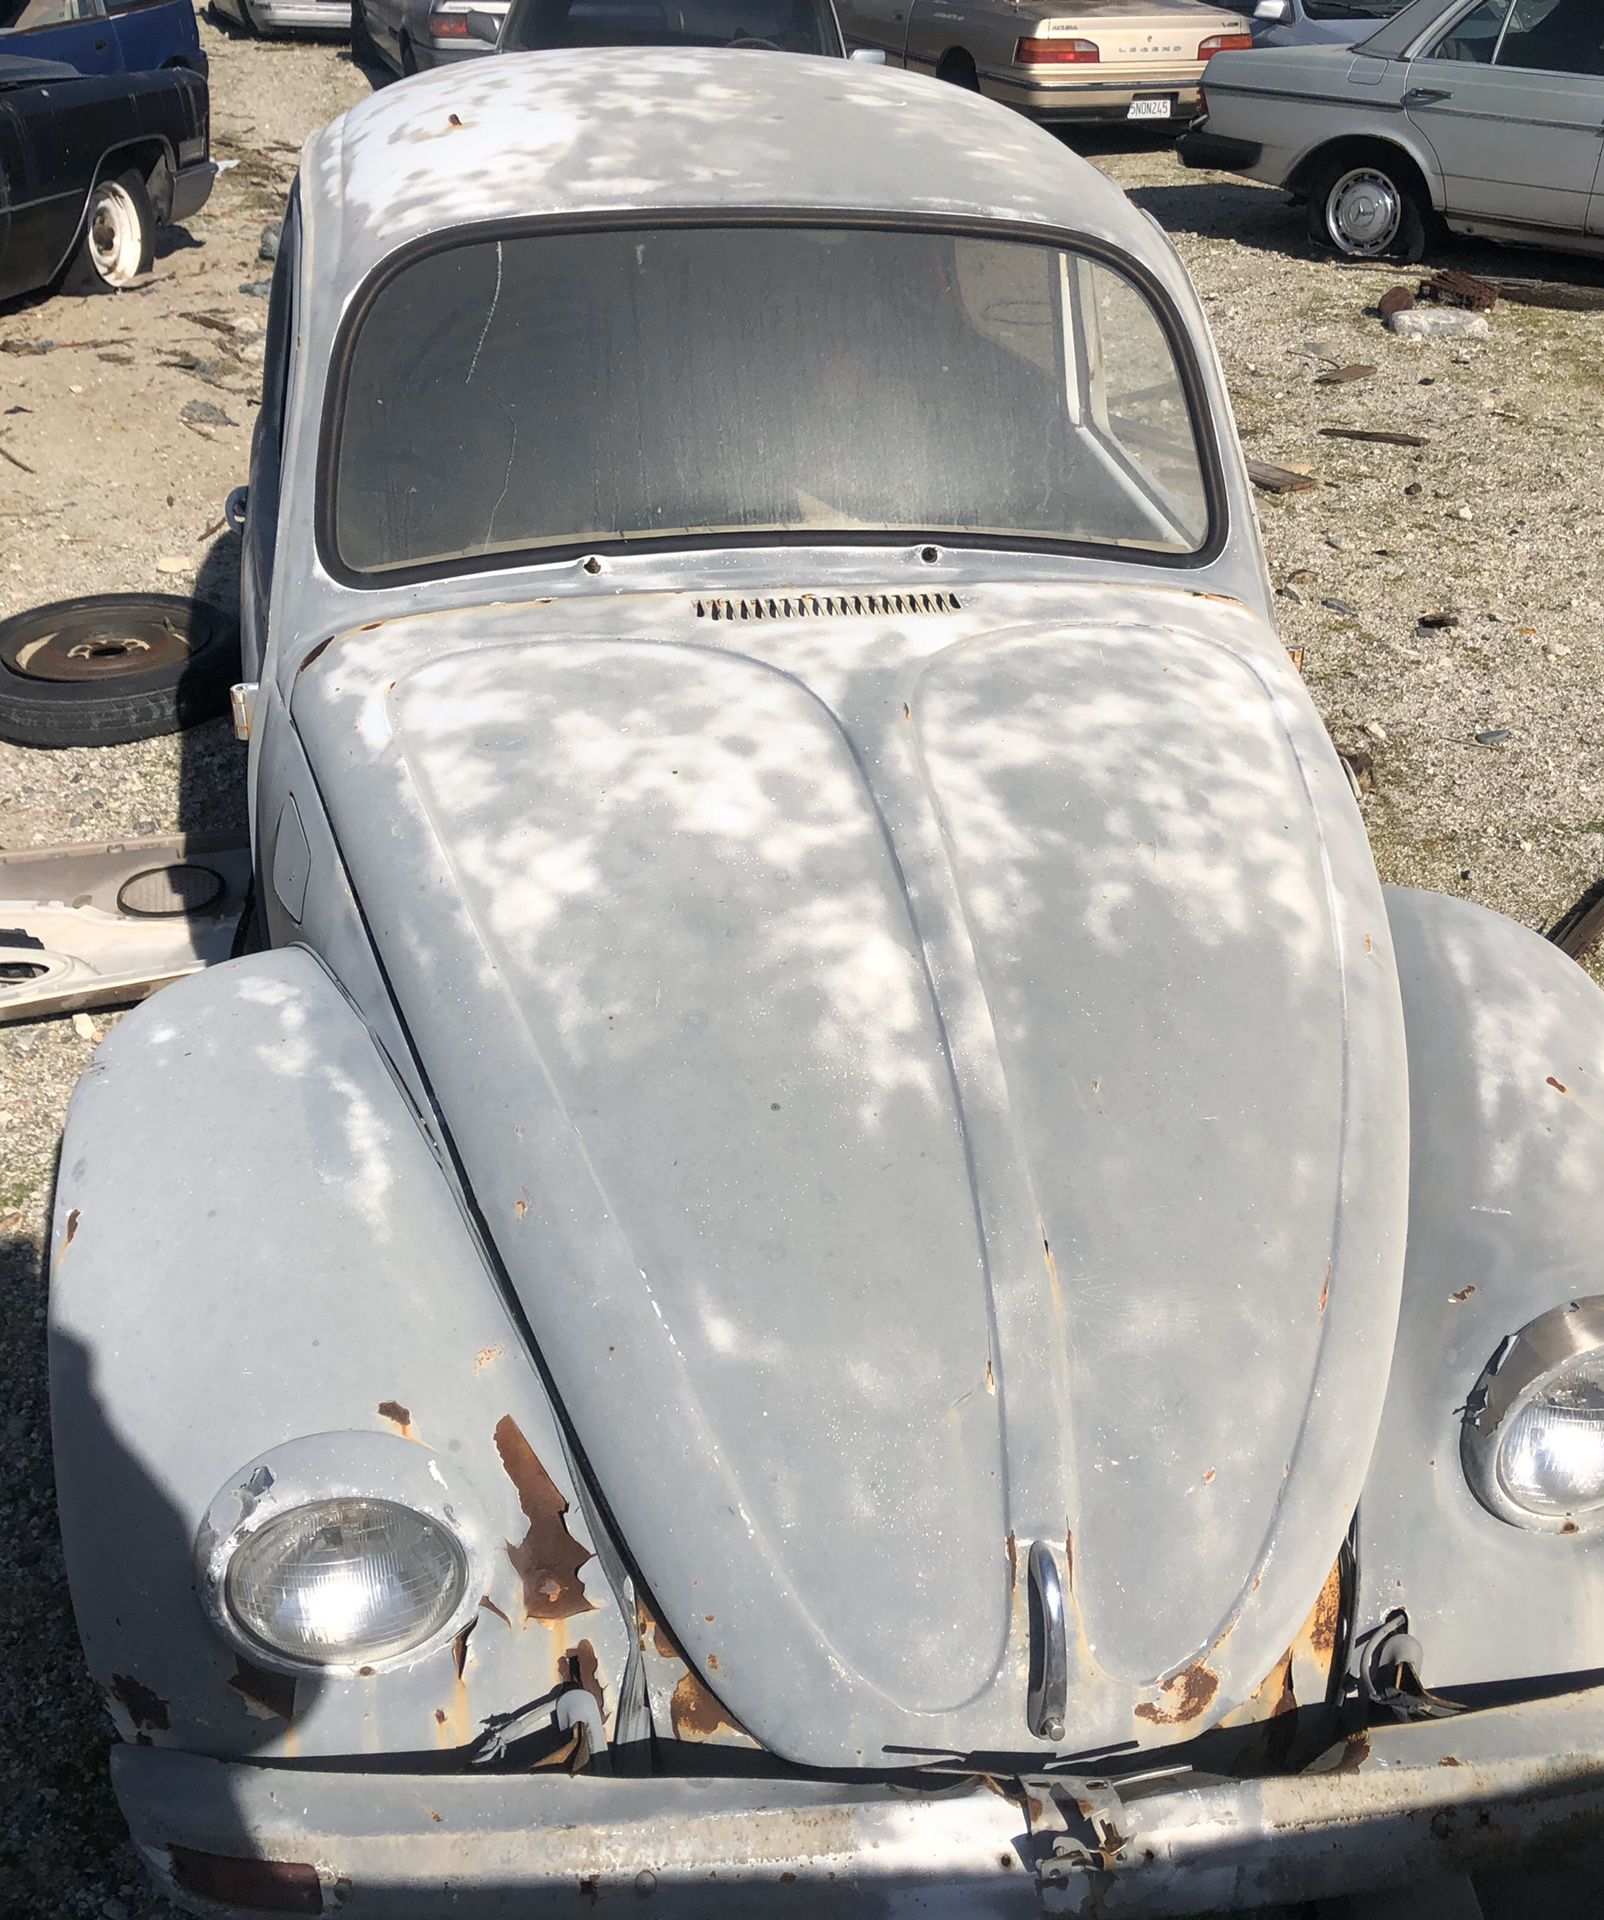 VW Beetle body and rolling chassis